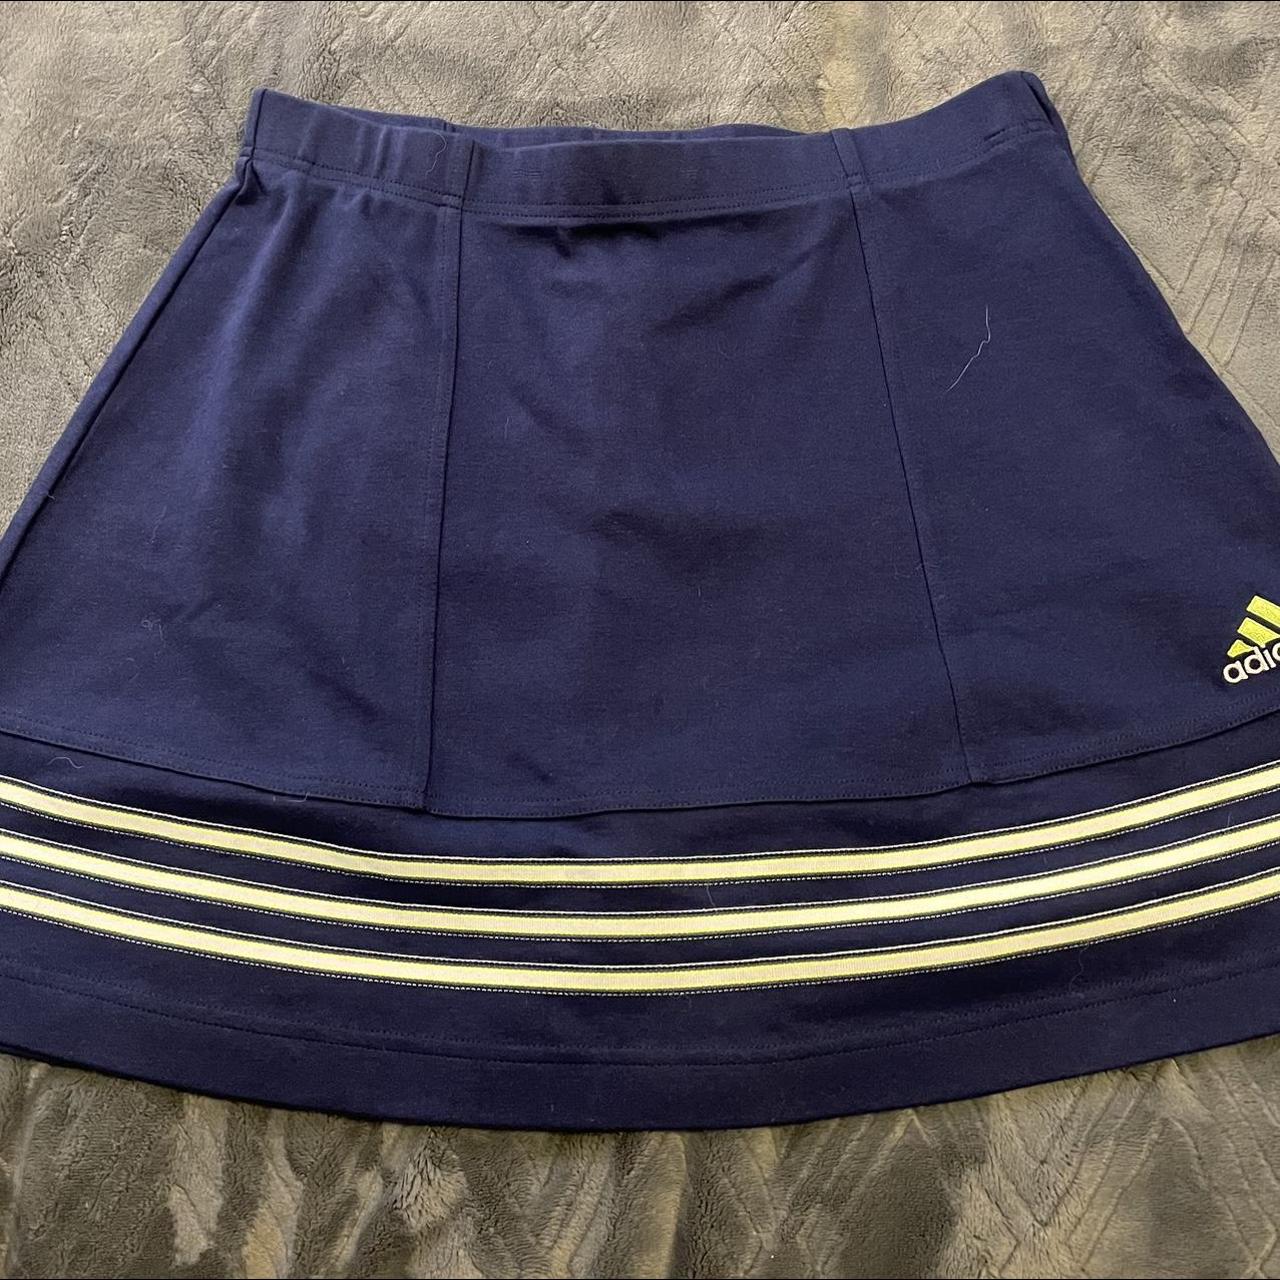 Mini tennis skirt with adidas stripes, and a green +... - Depop